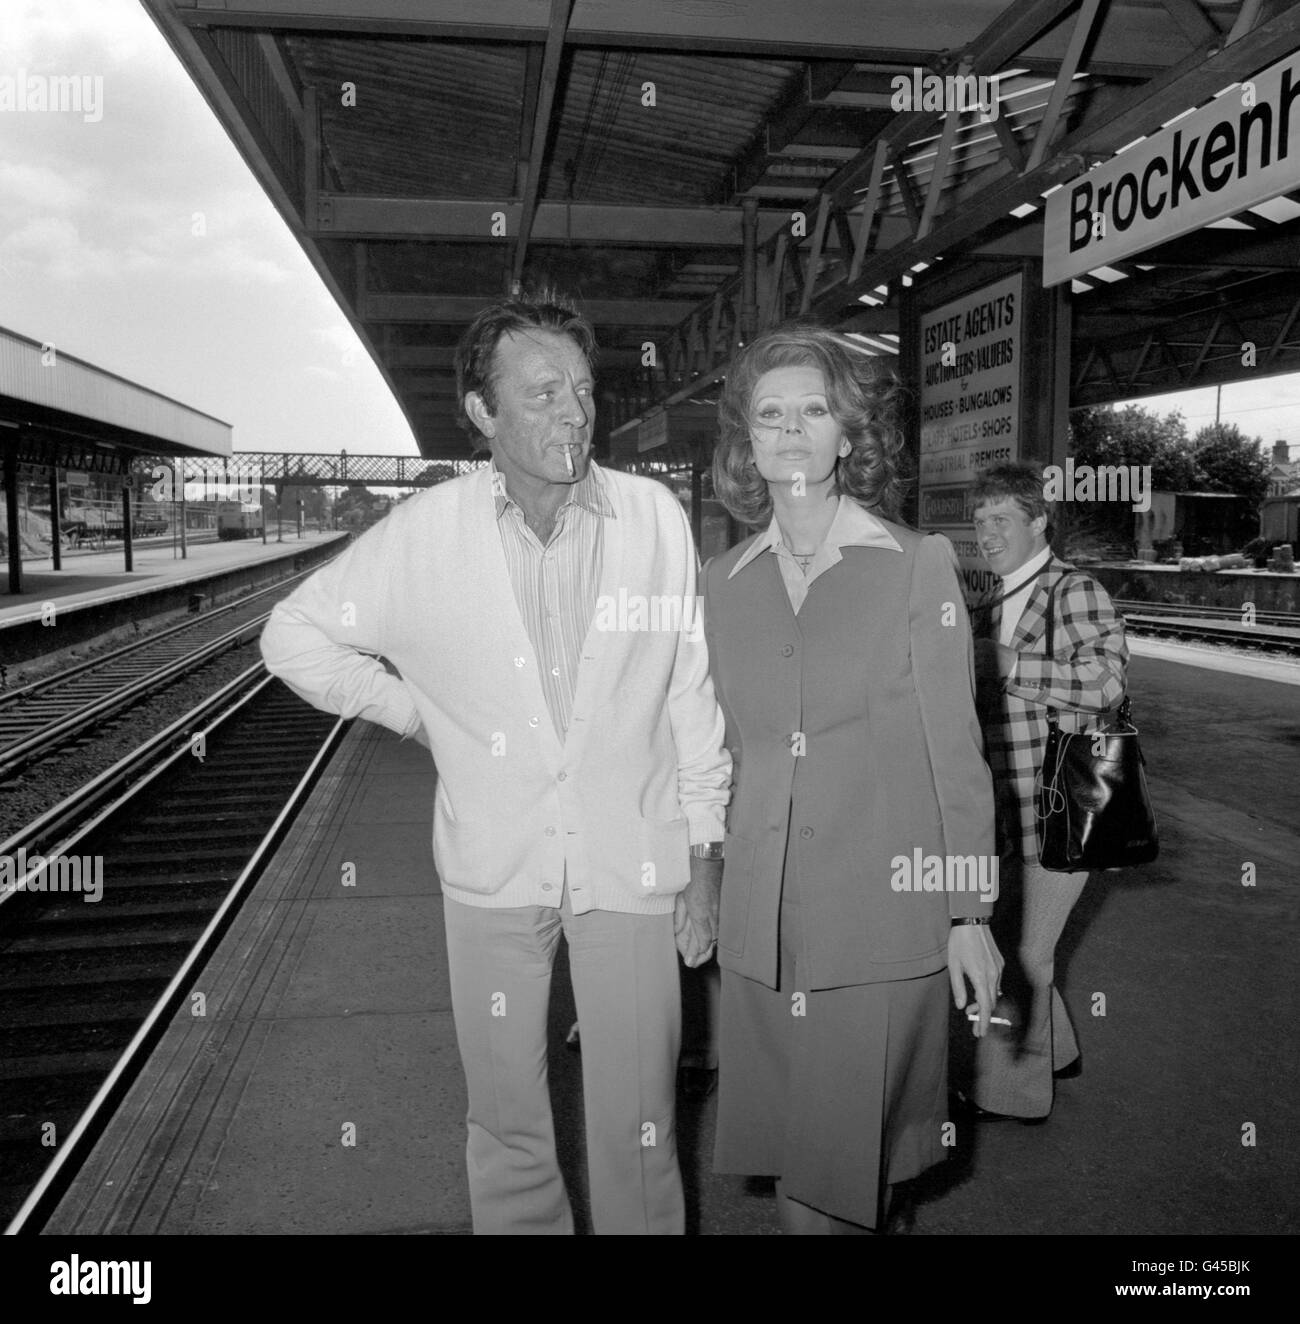 Actor Richard Burton with Sophia Loren on location at Brockenhurst Station in the New Forest in a new version of Noel Coward's play 'Brief Encounter'. Stock Photo